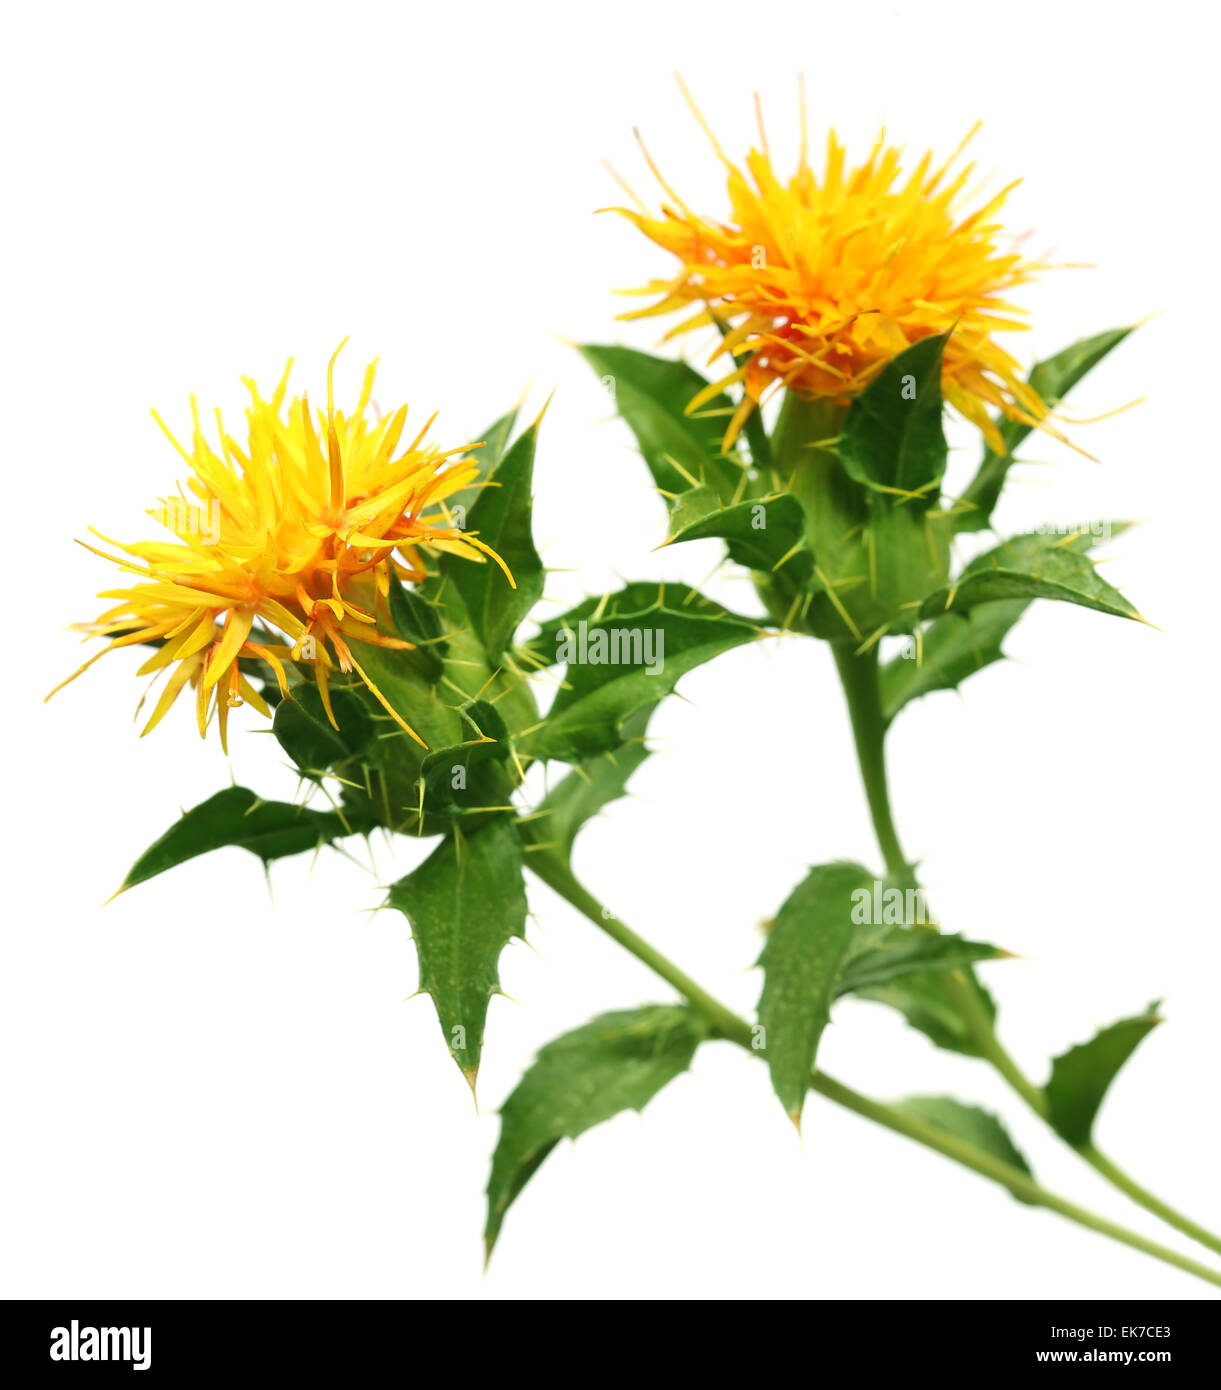 Safflower used as a food additive over white background Stock Photo